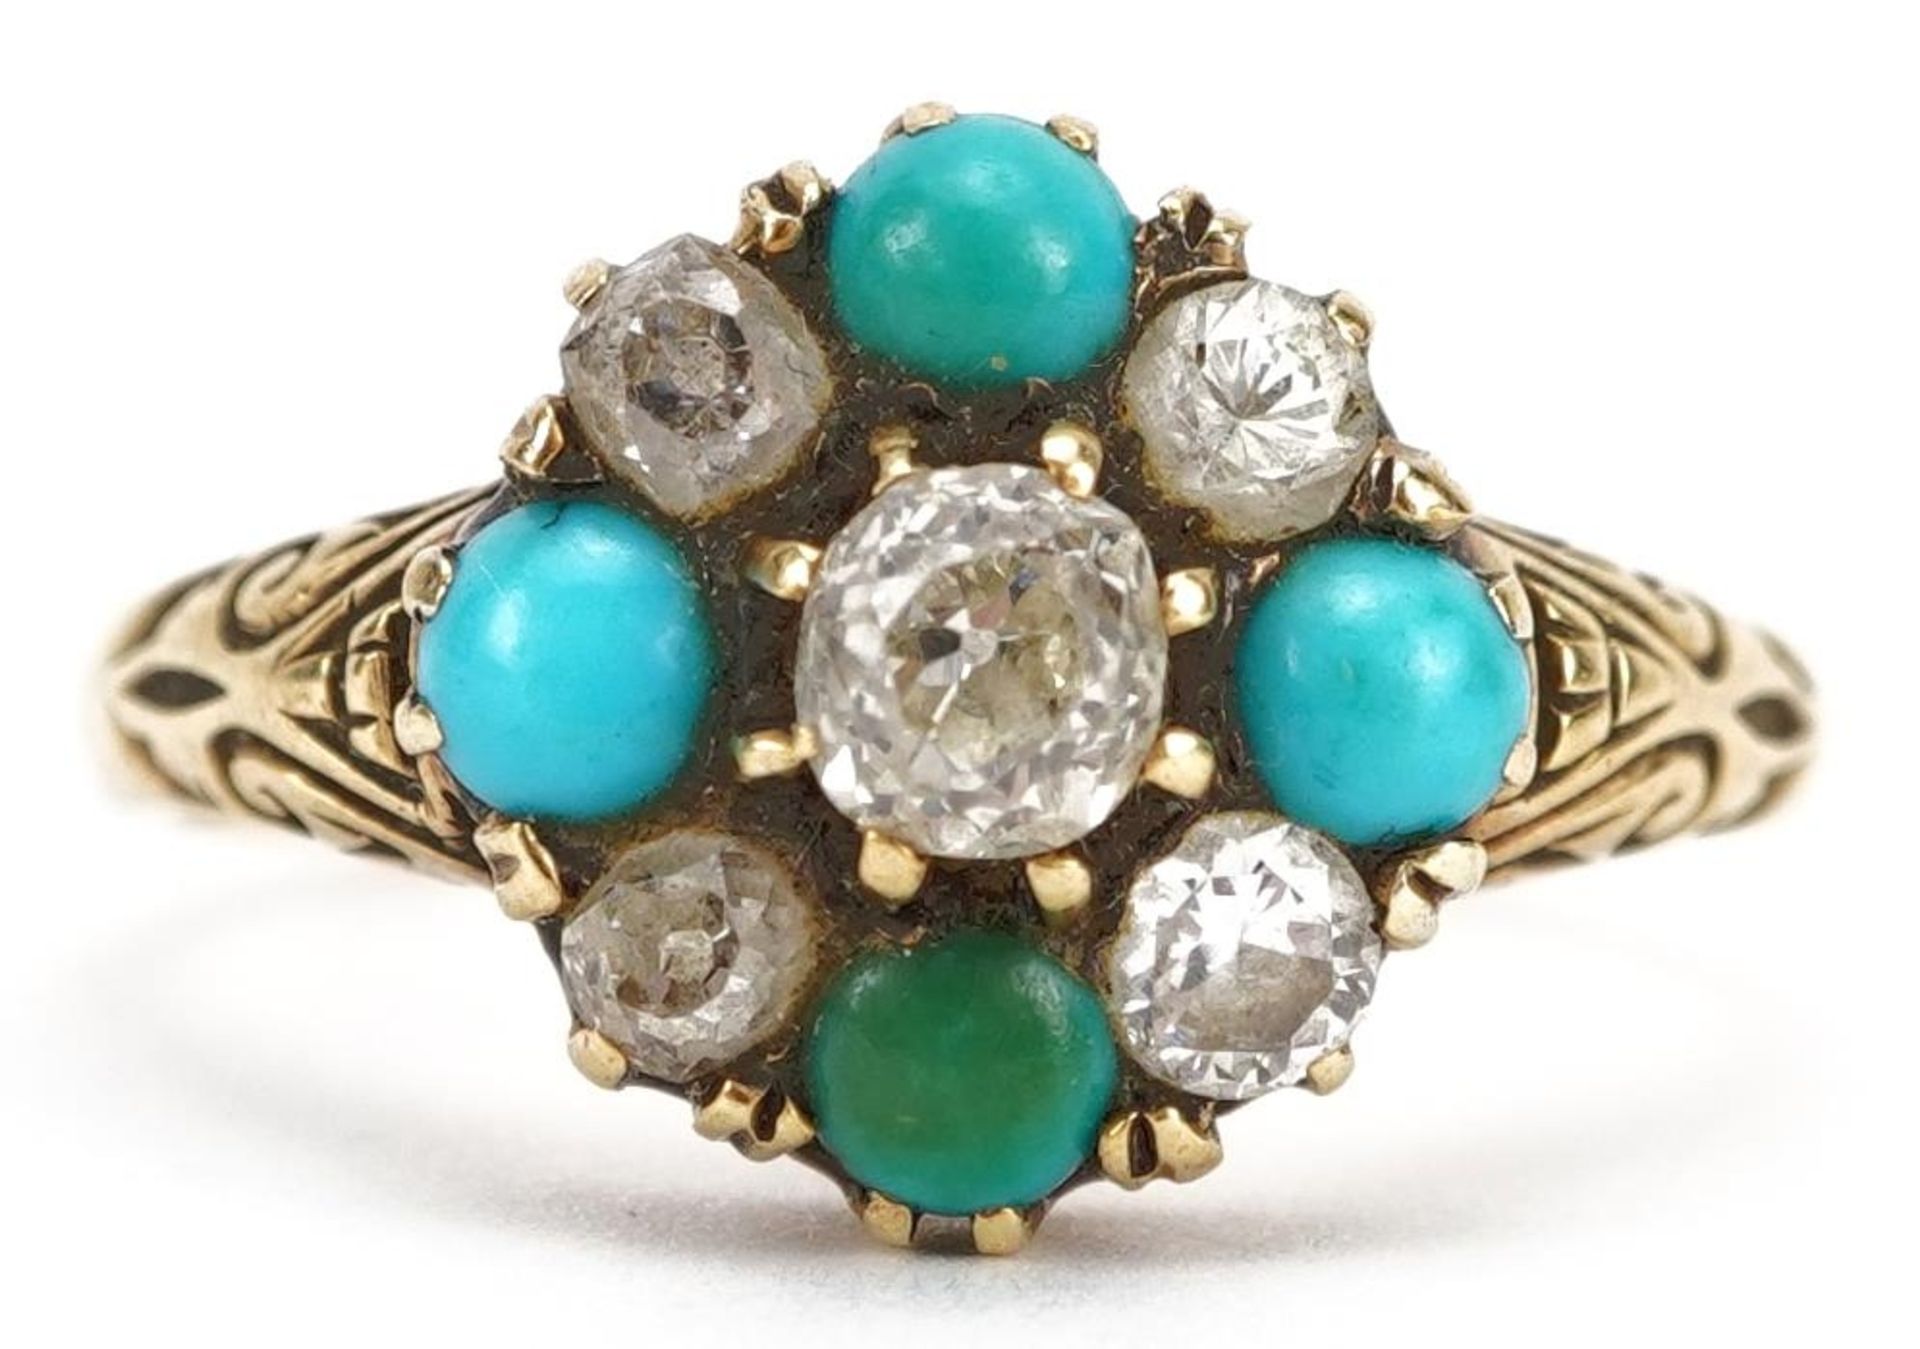 Antique 18ct gold diamond and turquoise two tier cluster ring with engraved shoulders, the largest